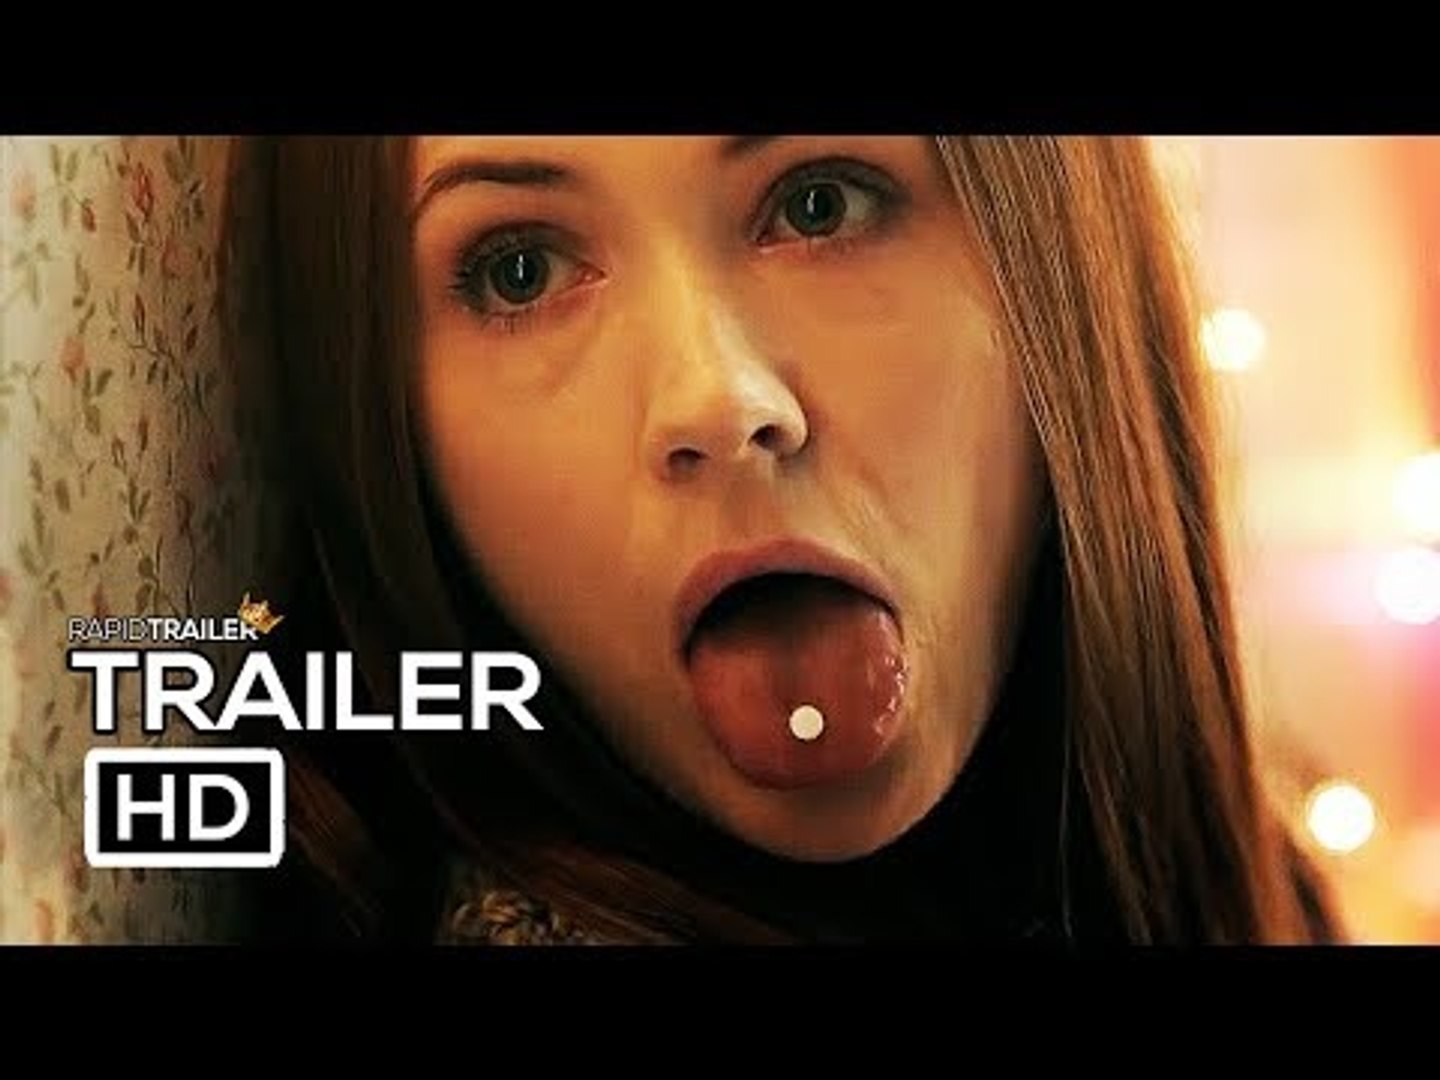 THE PARTY'S JUST BEGINNING Official Trailer (2018) Karen Gillan, Drama  Movie HD - video Dailymotion